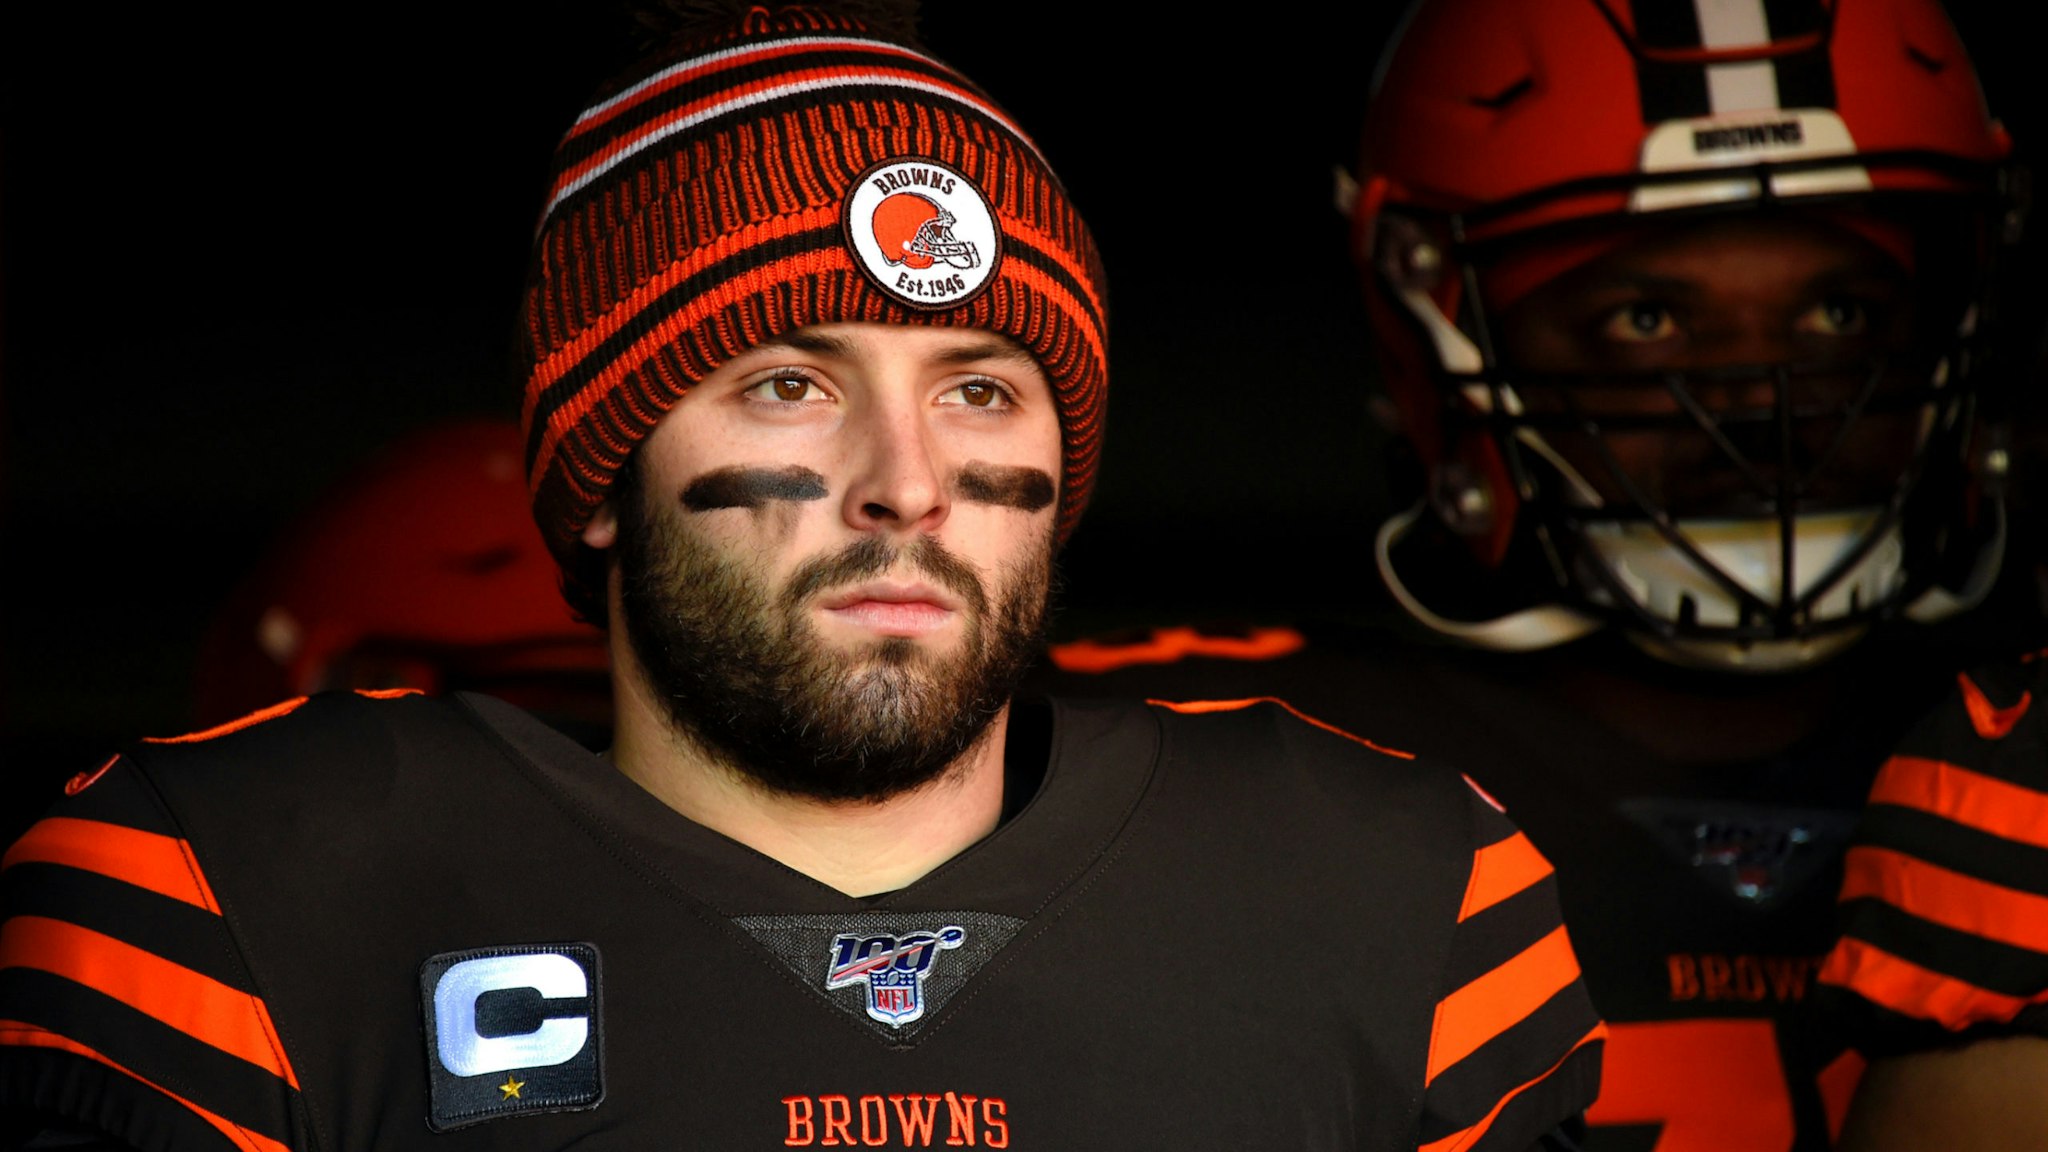 Baker Mayfield #6 of the Cleveland Browns prepares to take the field prior to the game against the Baltimore Ravens at FirstEnergy Stadium on December 22, 2019 in Cleveland, Ohio.